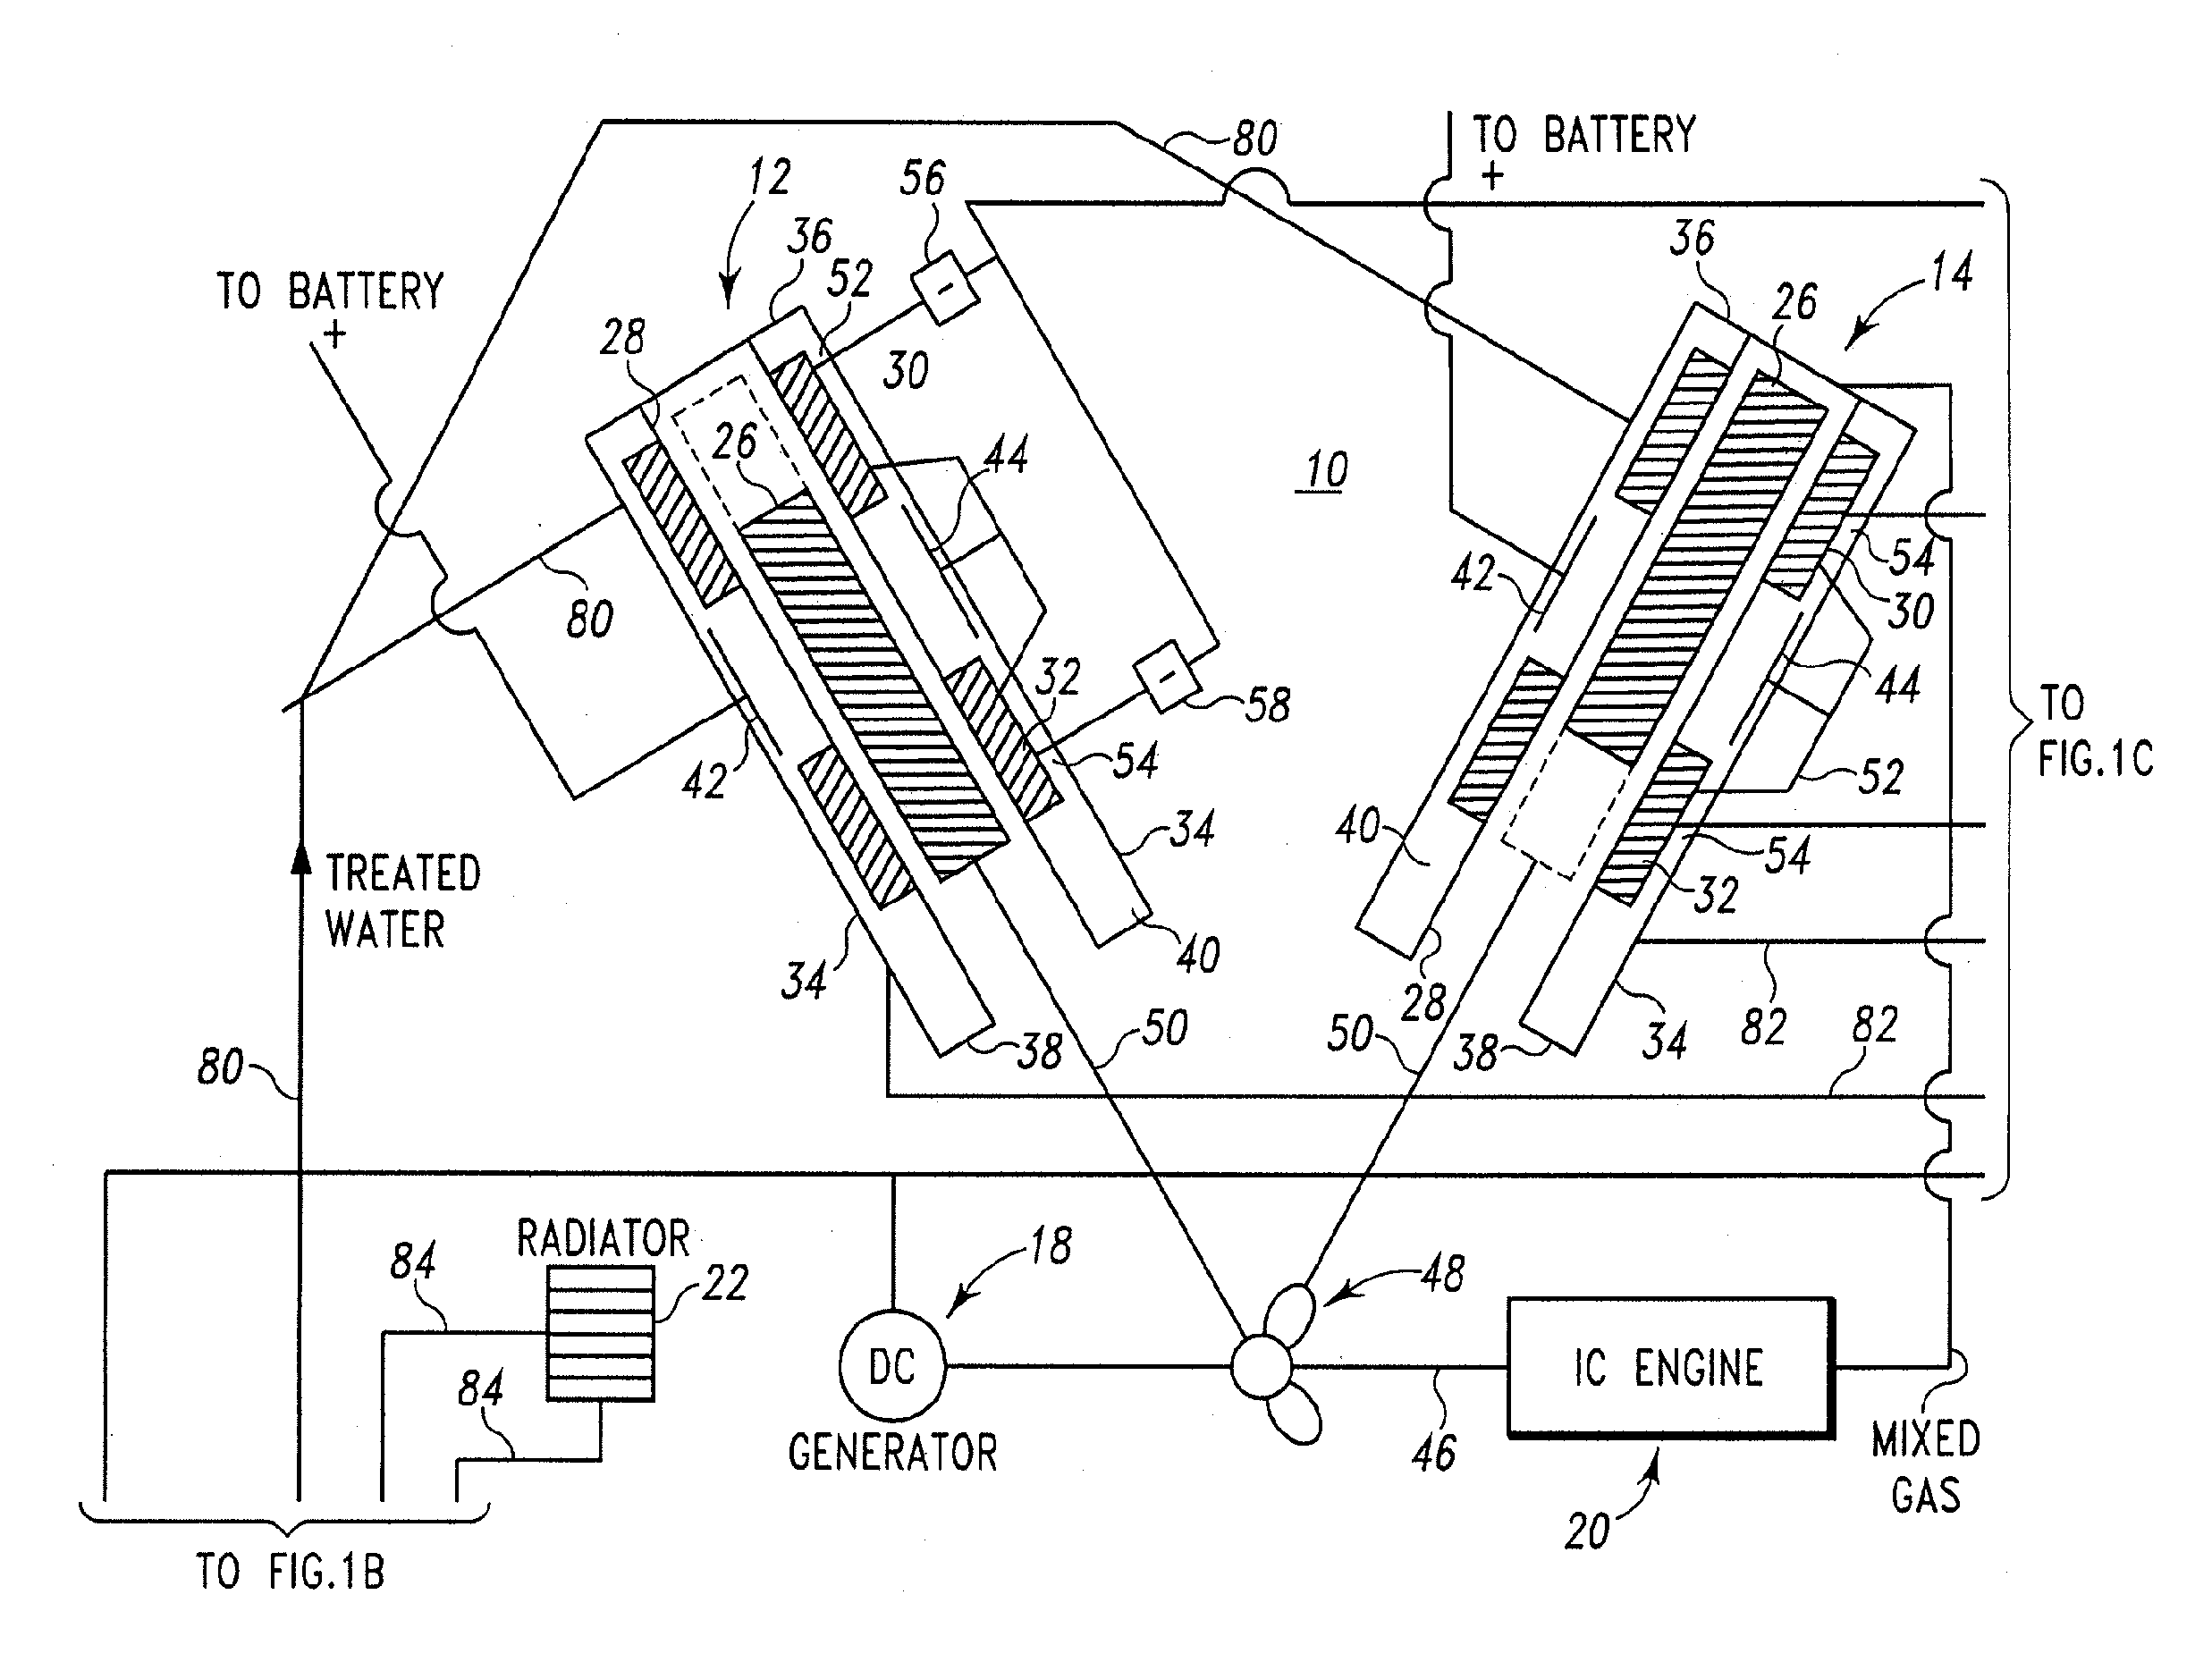 System including an electromagnetically energized piston motor designed to convert chemical and electrical energy to mechanical energy